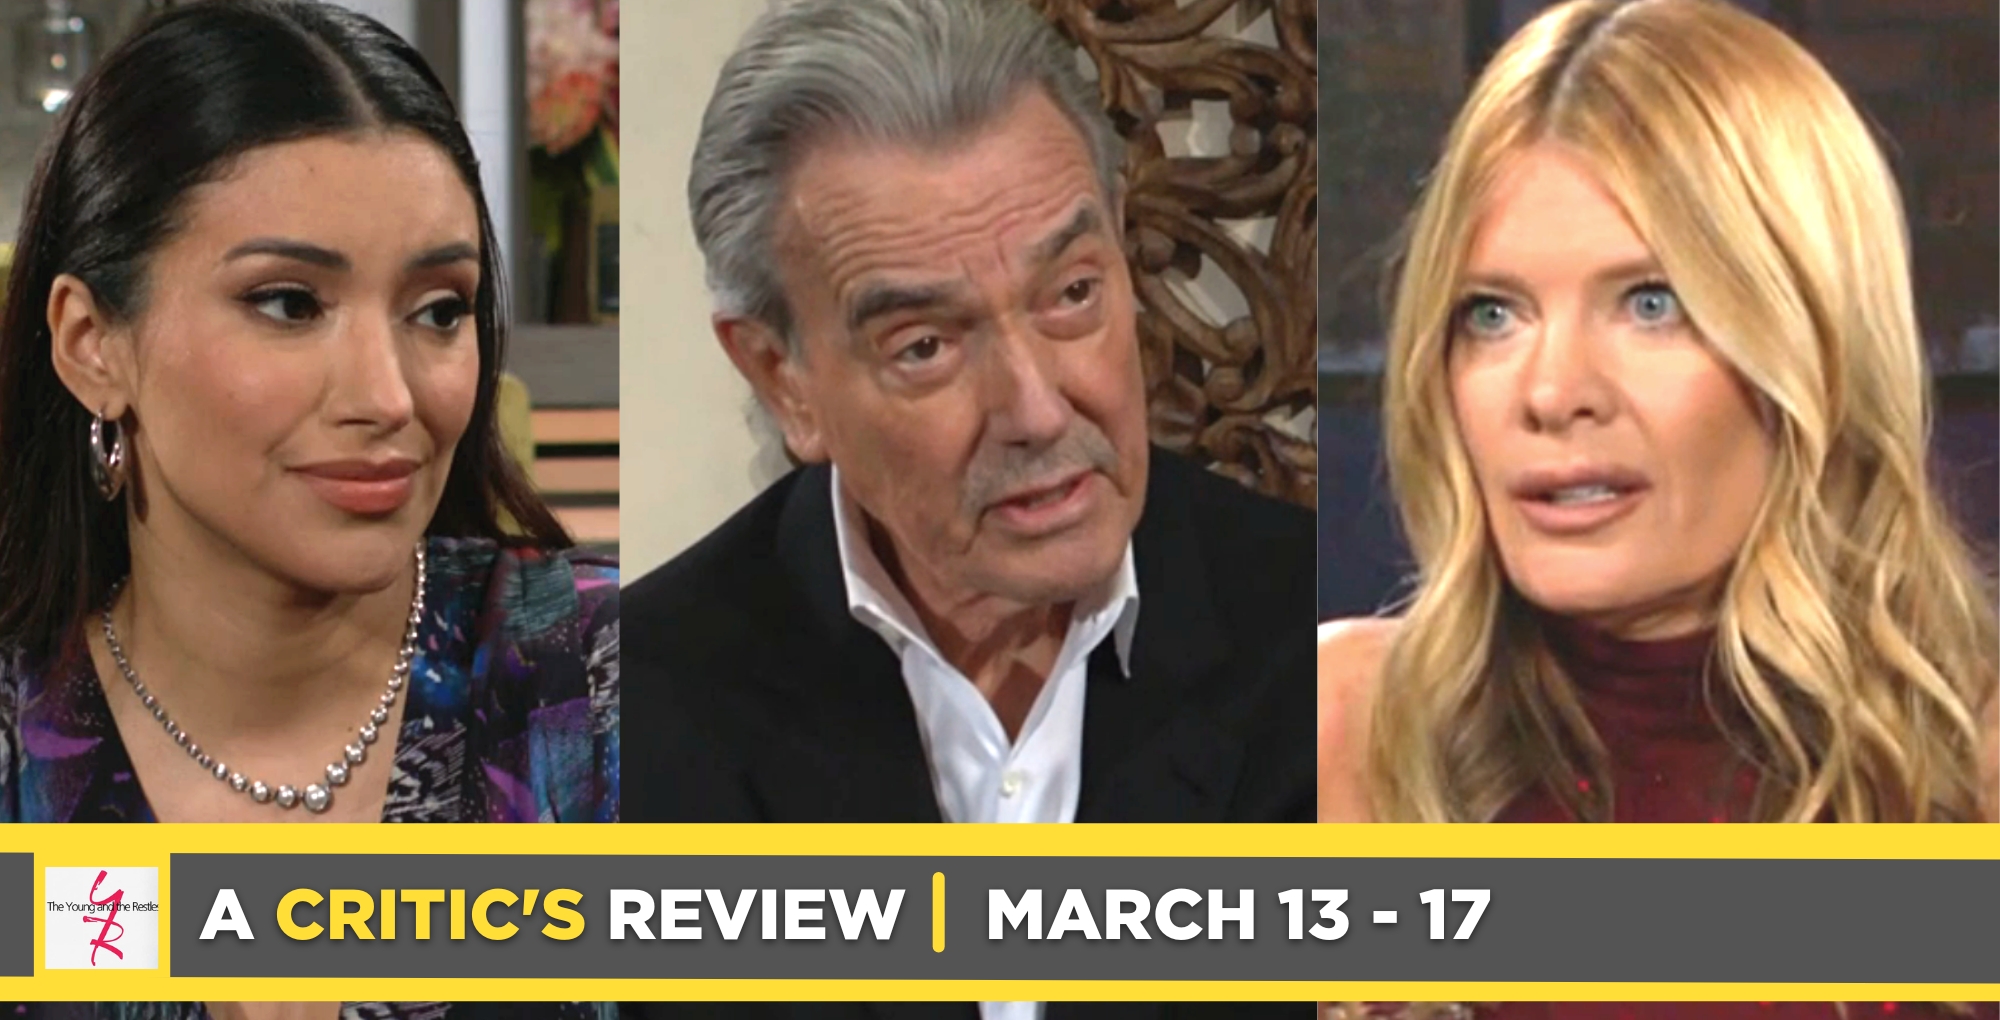 the young and the restless critic's review for march 13 – march 17, 2023, three images audra, victor, and phyllis